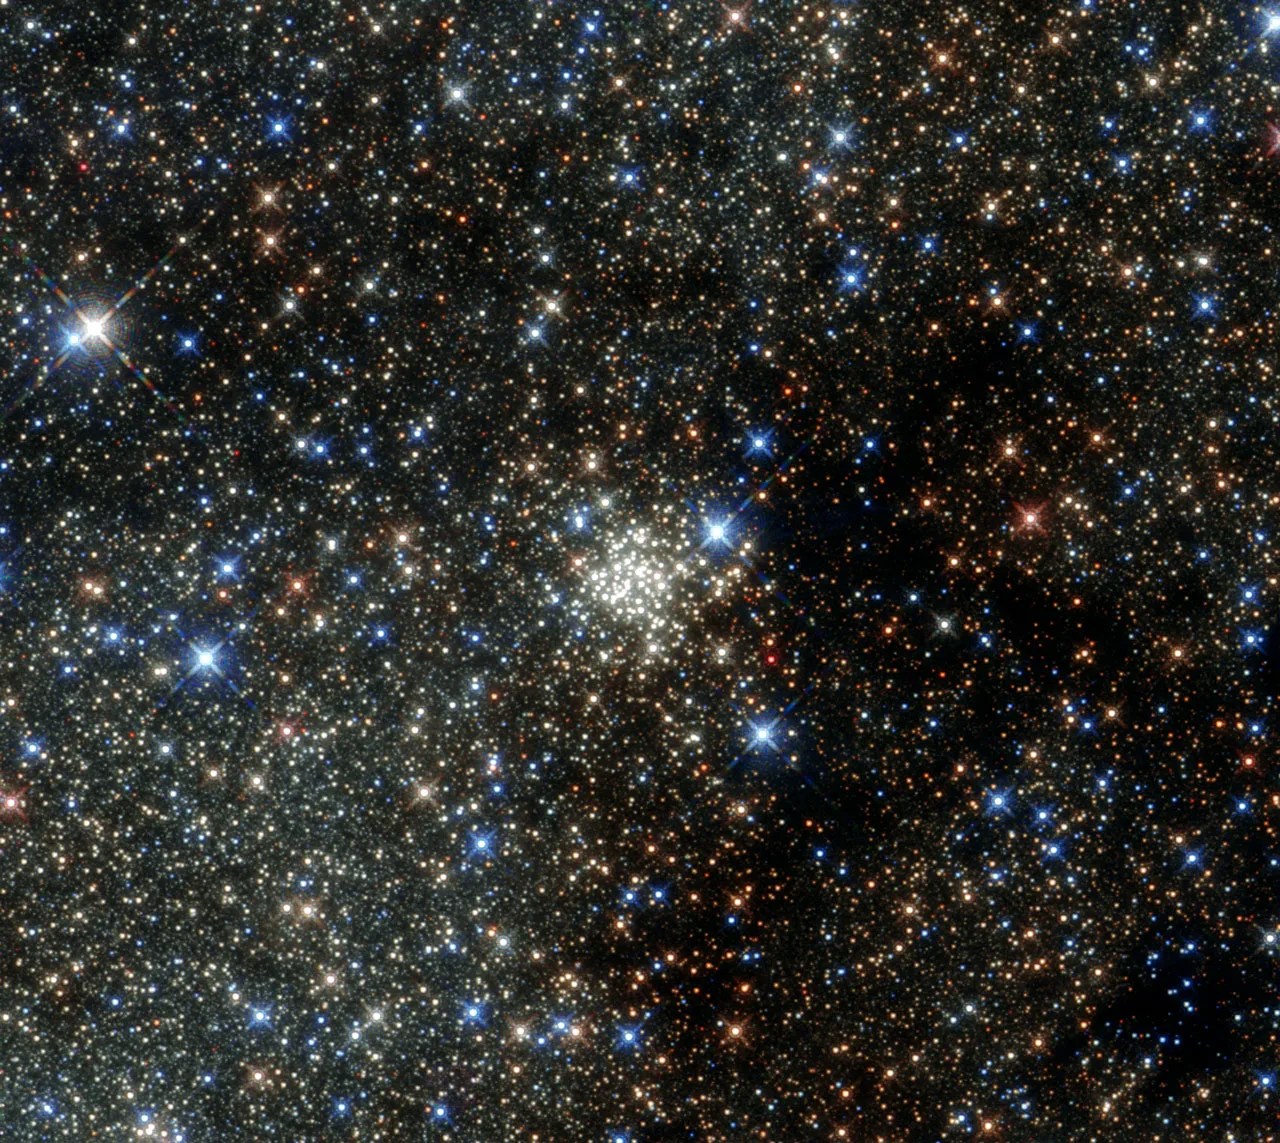 A field of stars of a variety of colors on a black background